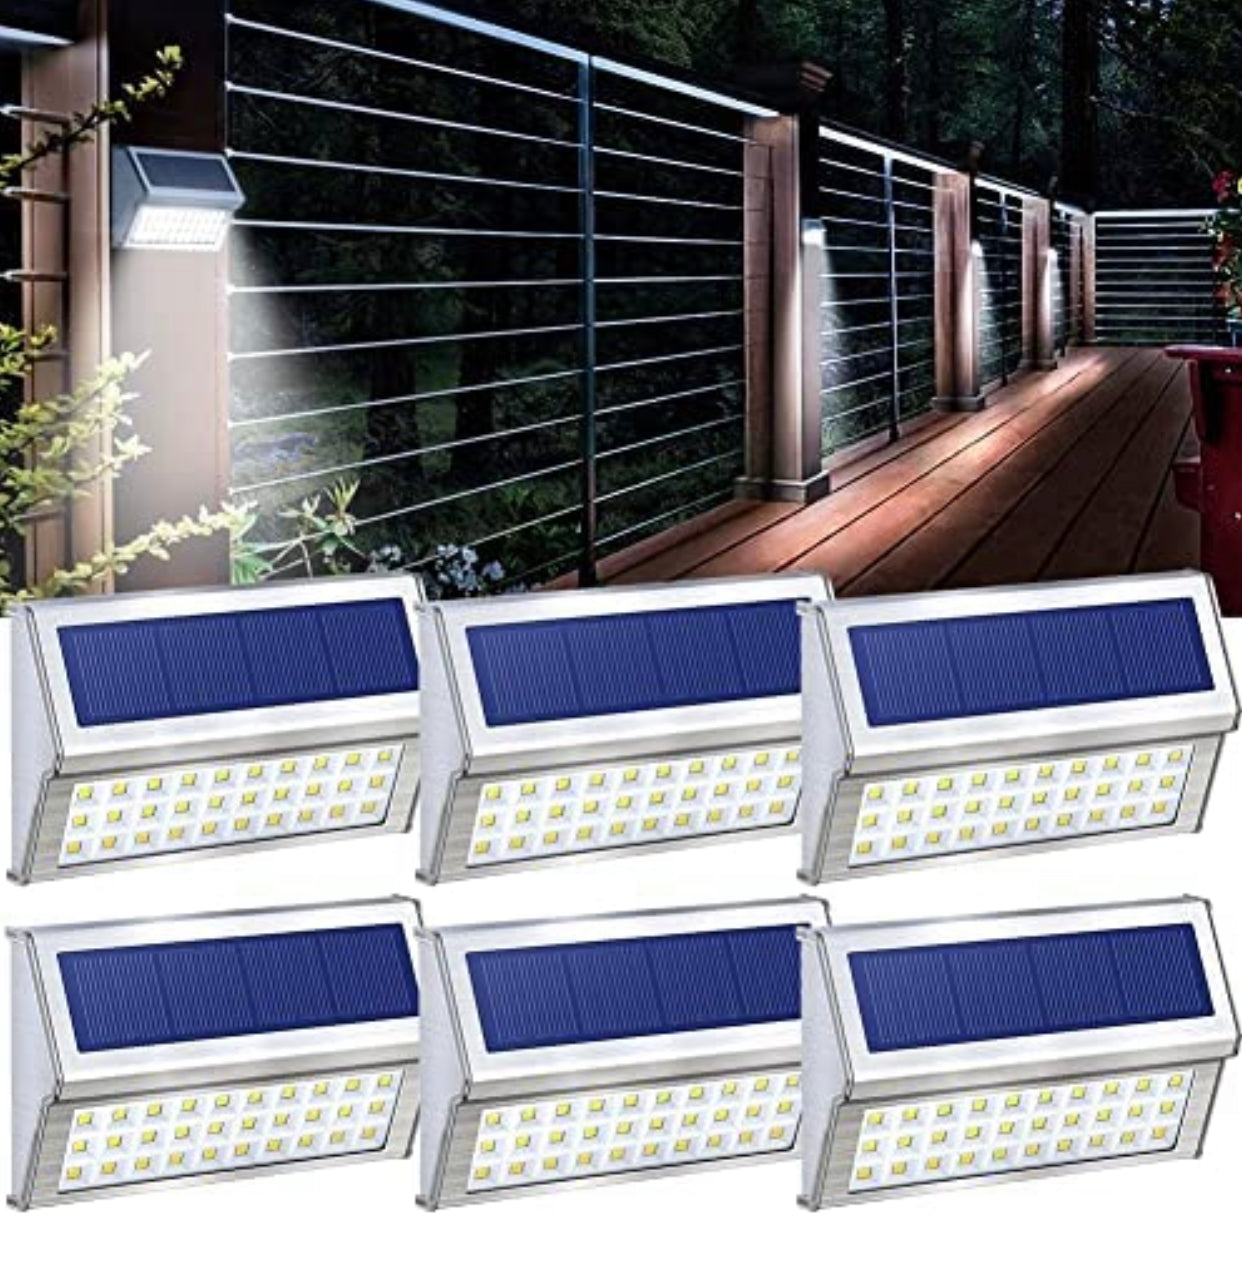 30 LED Solar Step Lights Outdoor【6 Pack】Stainless Steel Bright Solar Deck And Stairs Lights